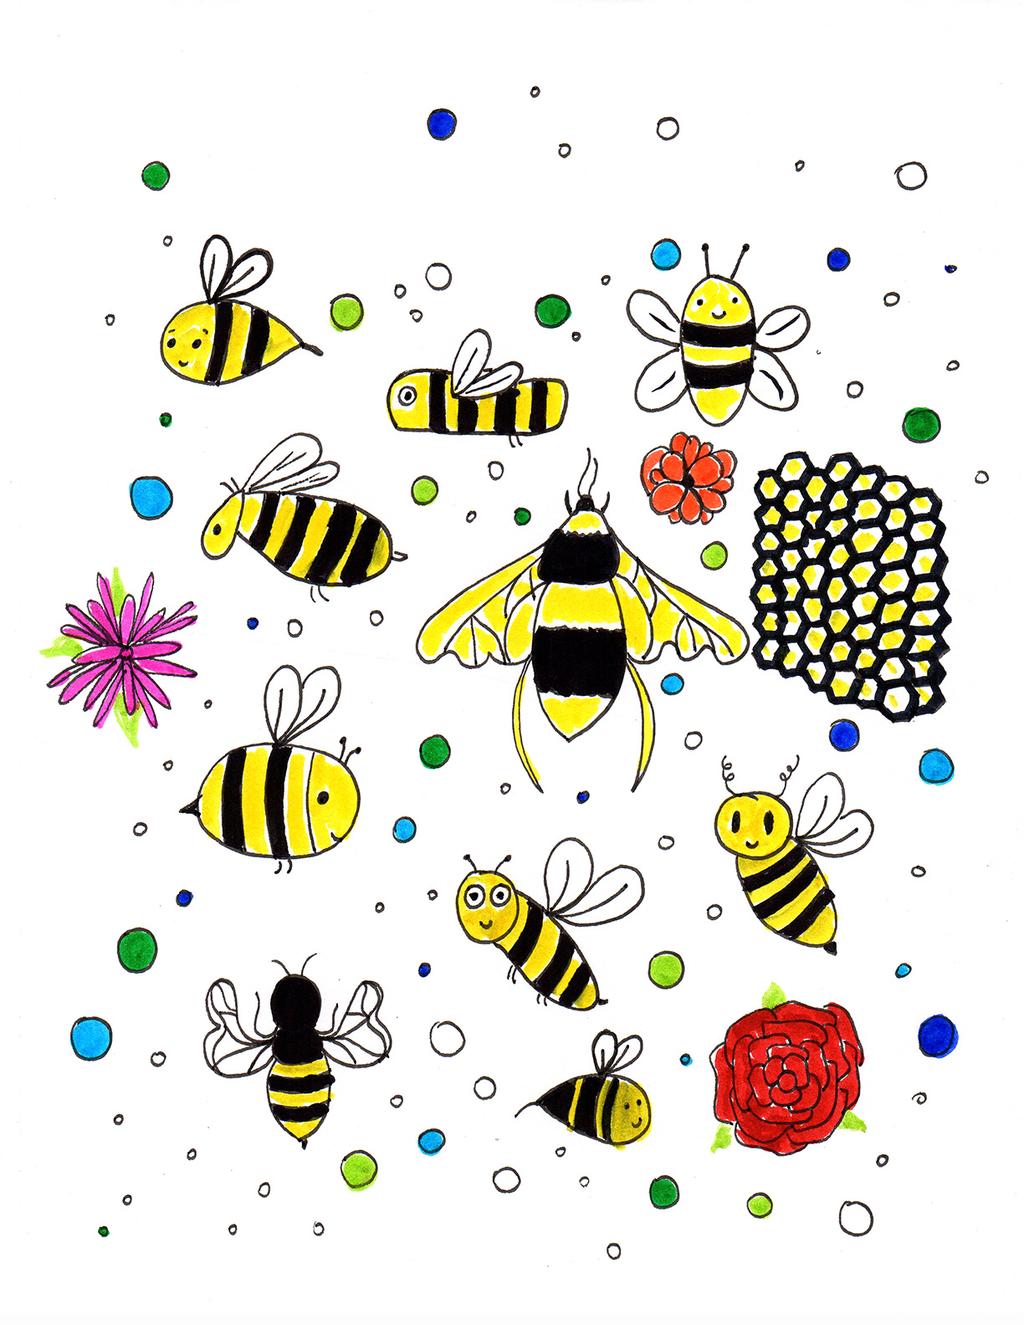 dog playing the piano & howling. Also, very funny & cute (to me anyhoo). So doodle away the old fashioned way...without the interweb. Doodle Extravaganza #24! Bees Bzzzzzzzzzzzzz.